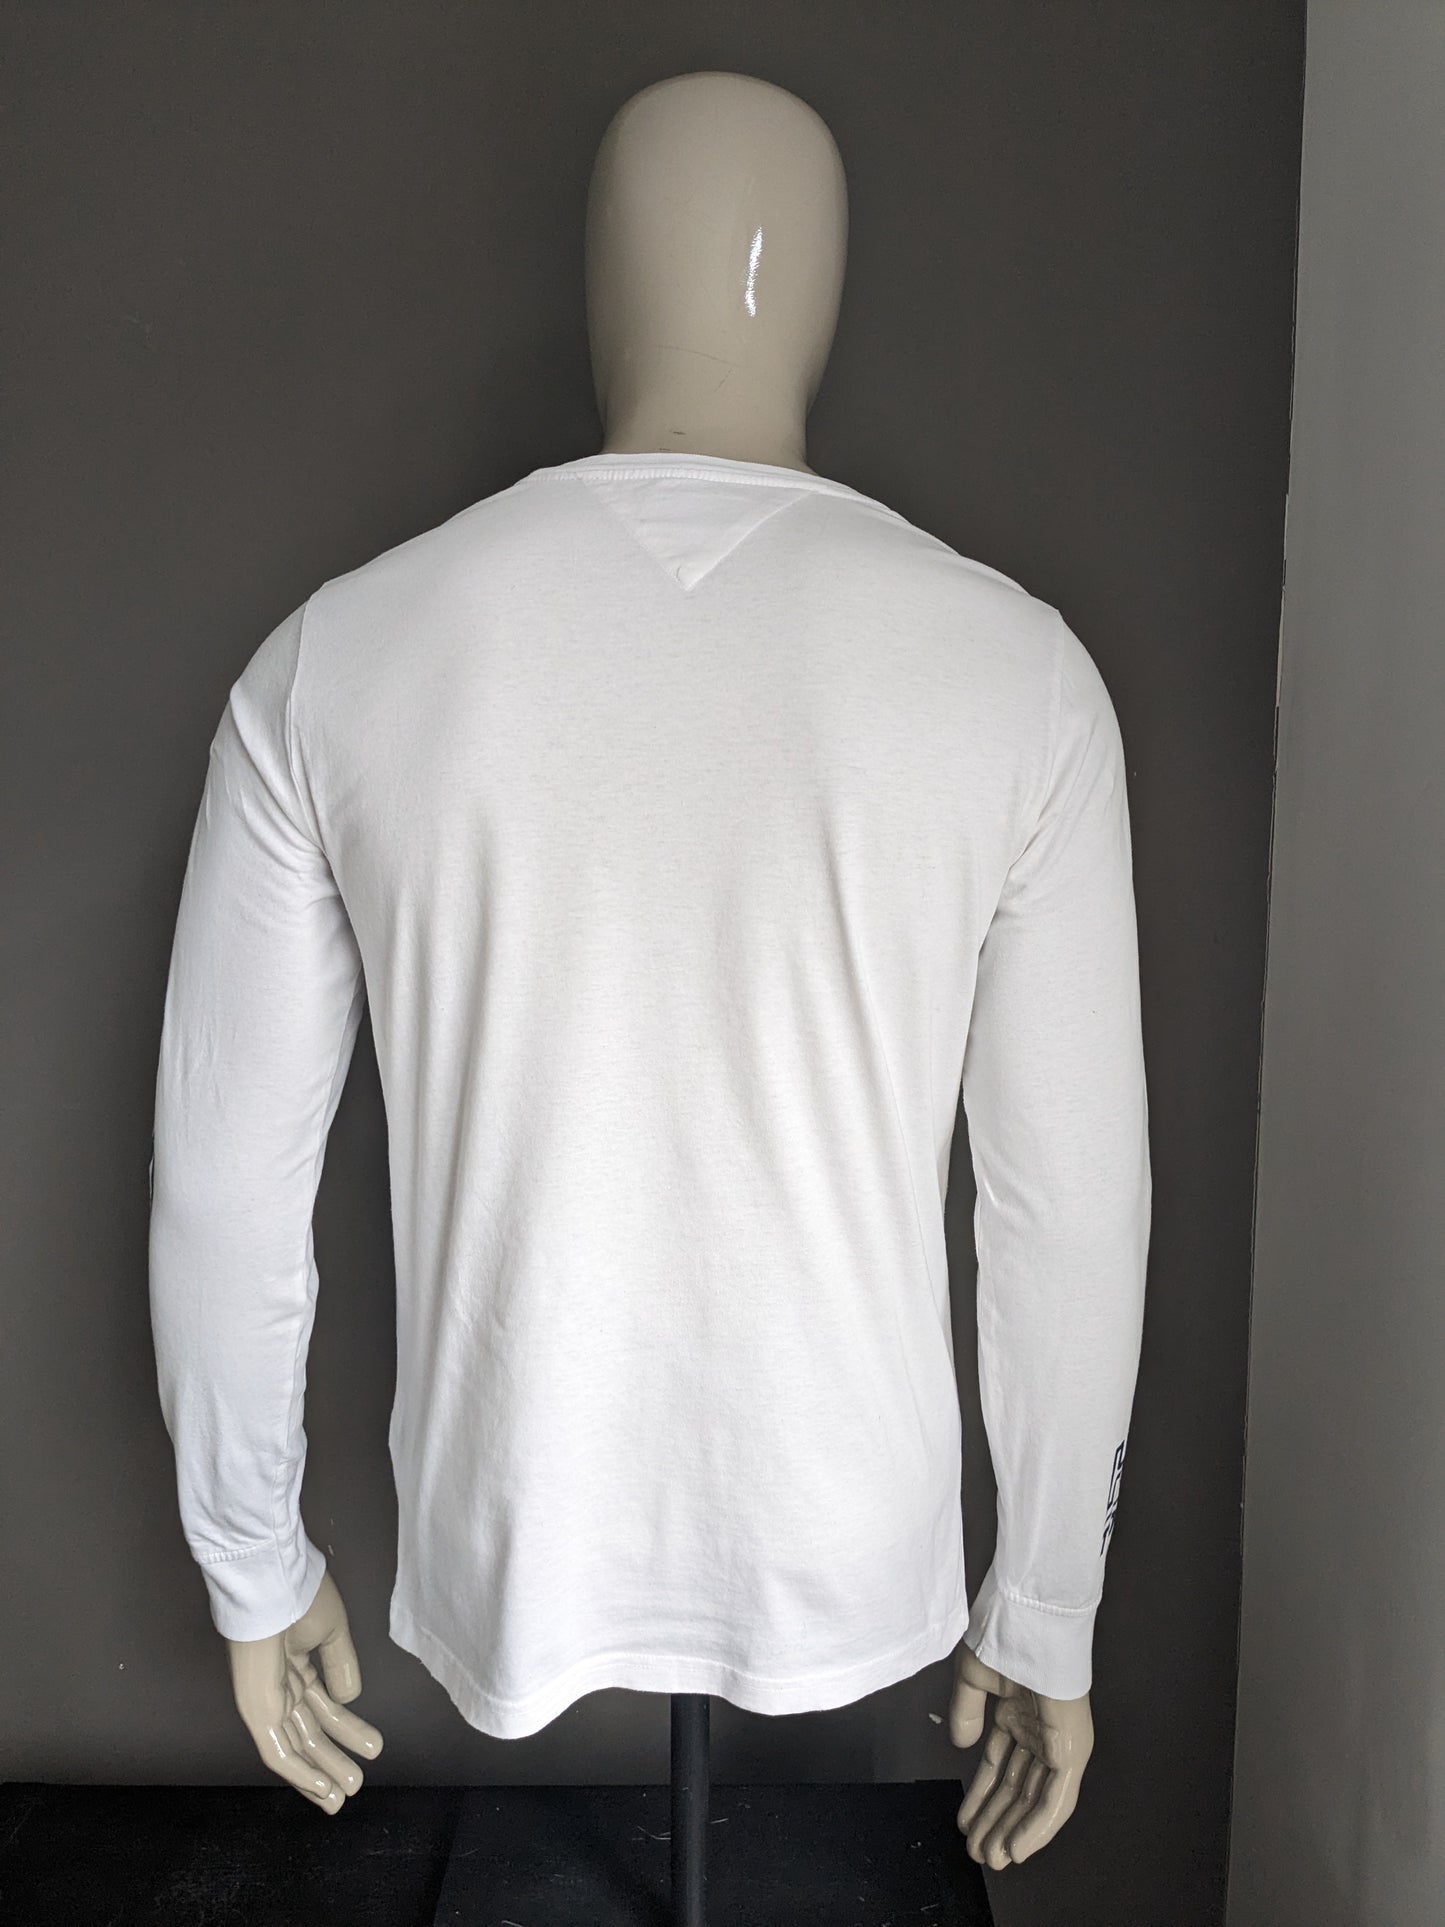 Tommy Jeans Longsleeve. White with print. Size M.